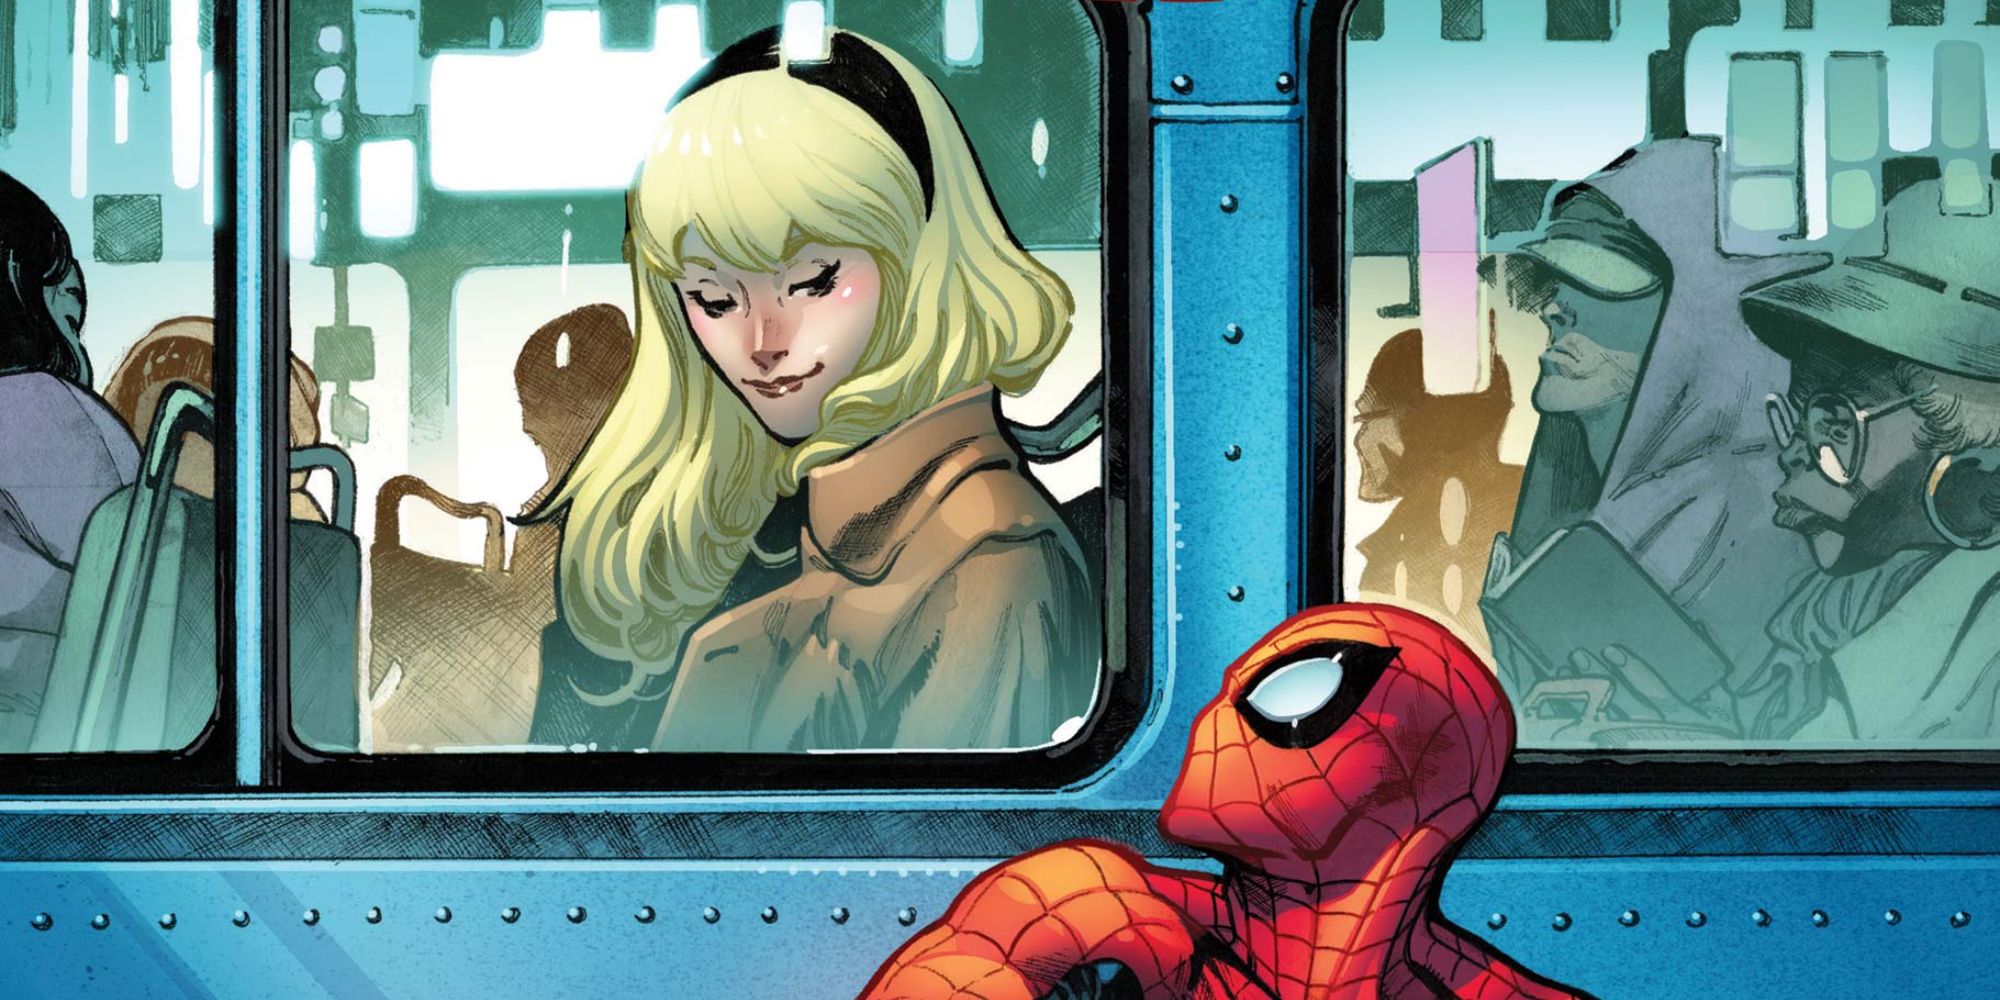 Gwen looking at Spider-Man in a comic cover